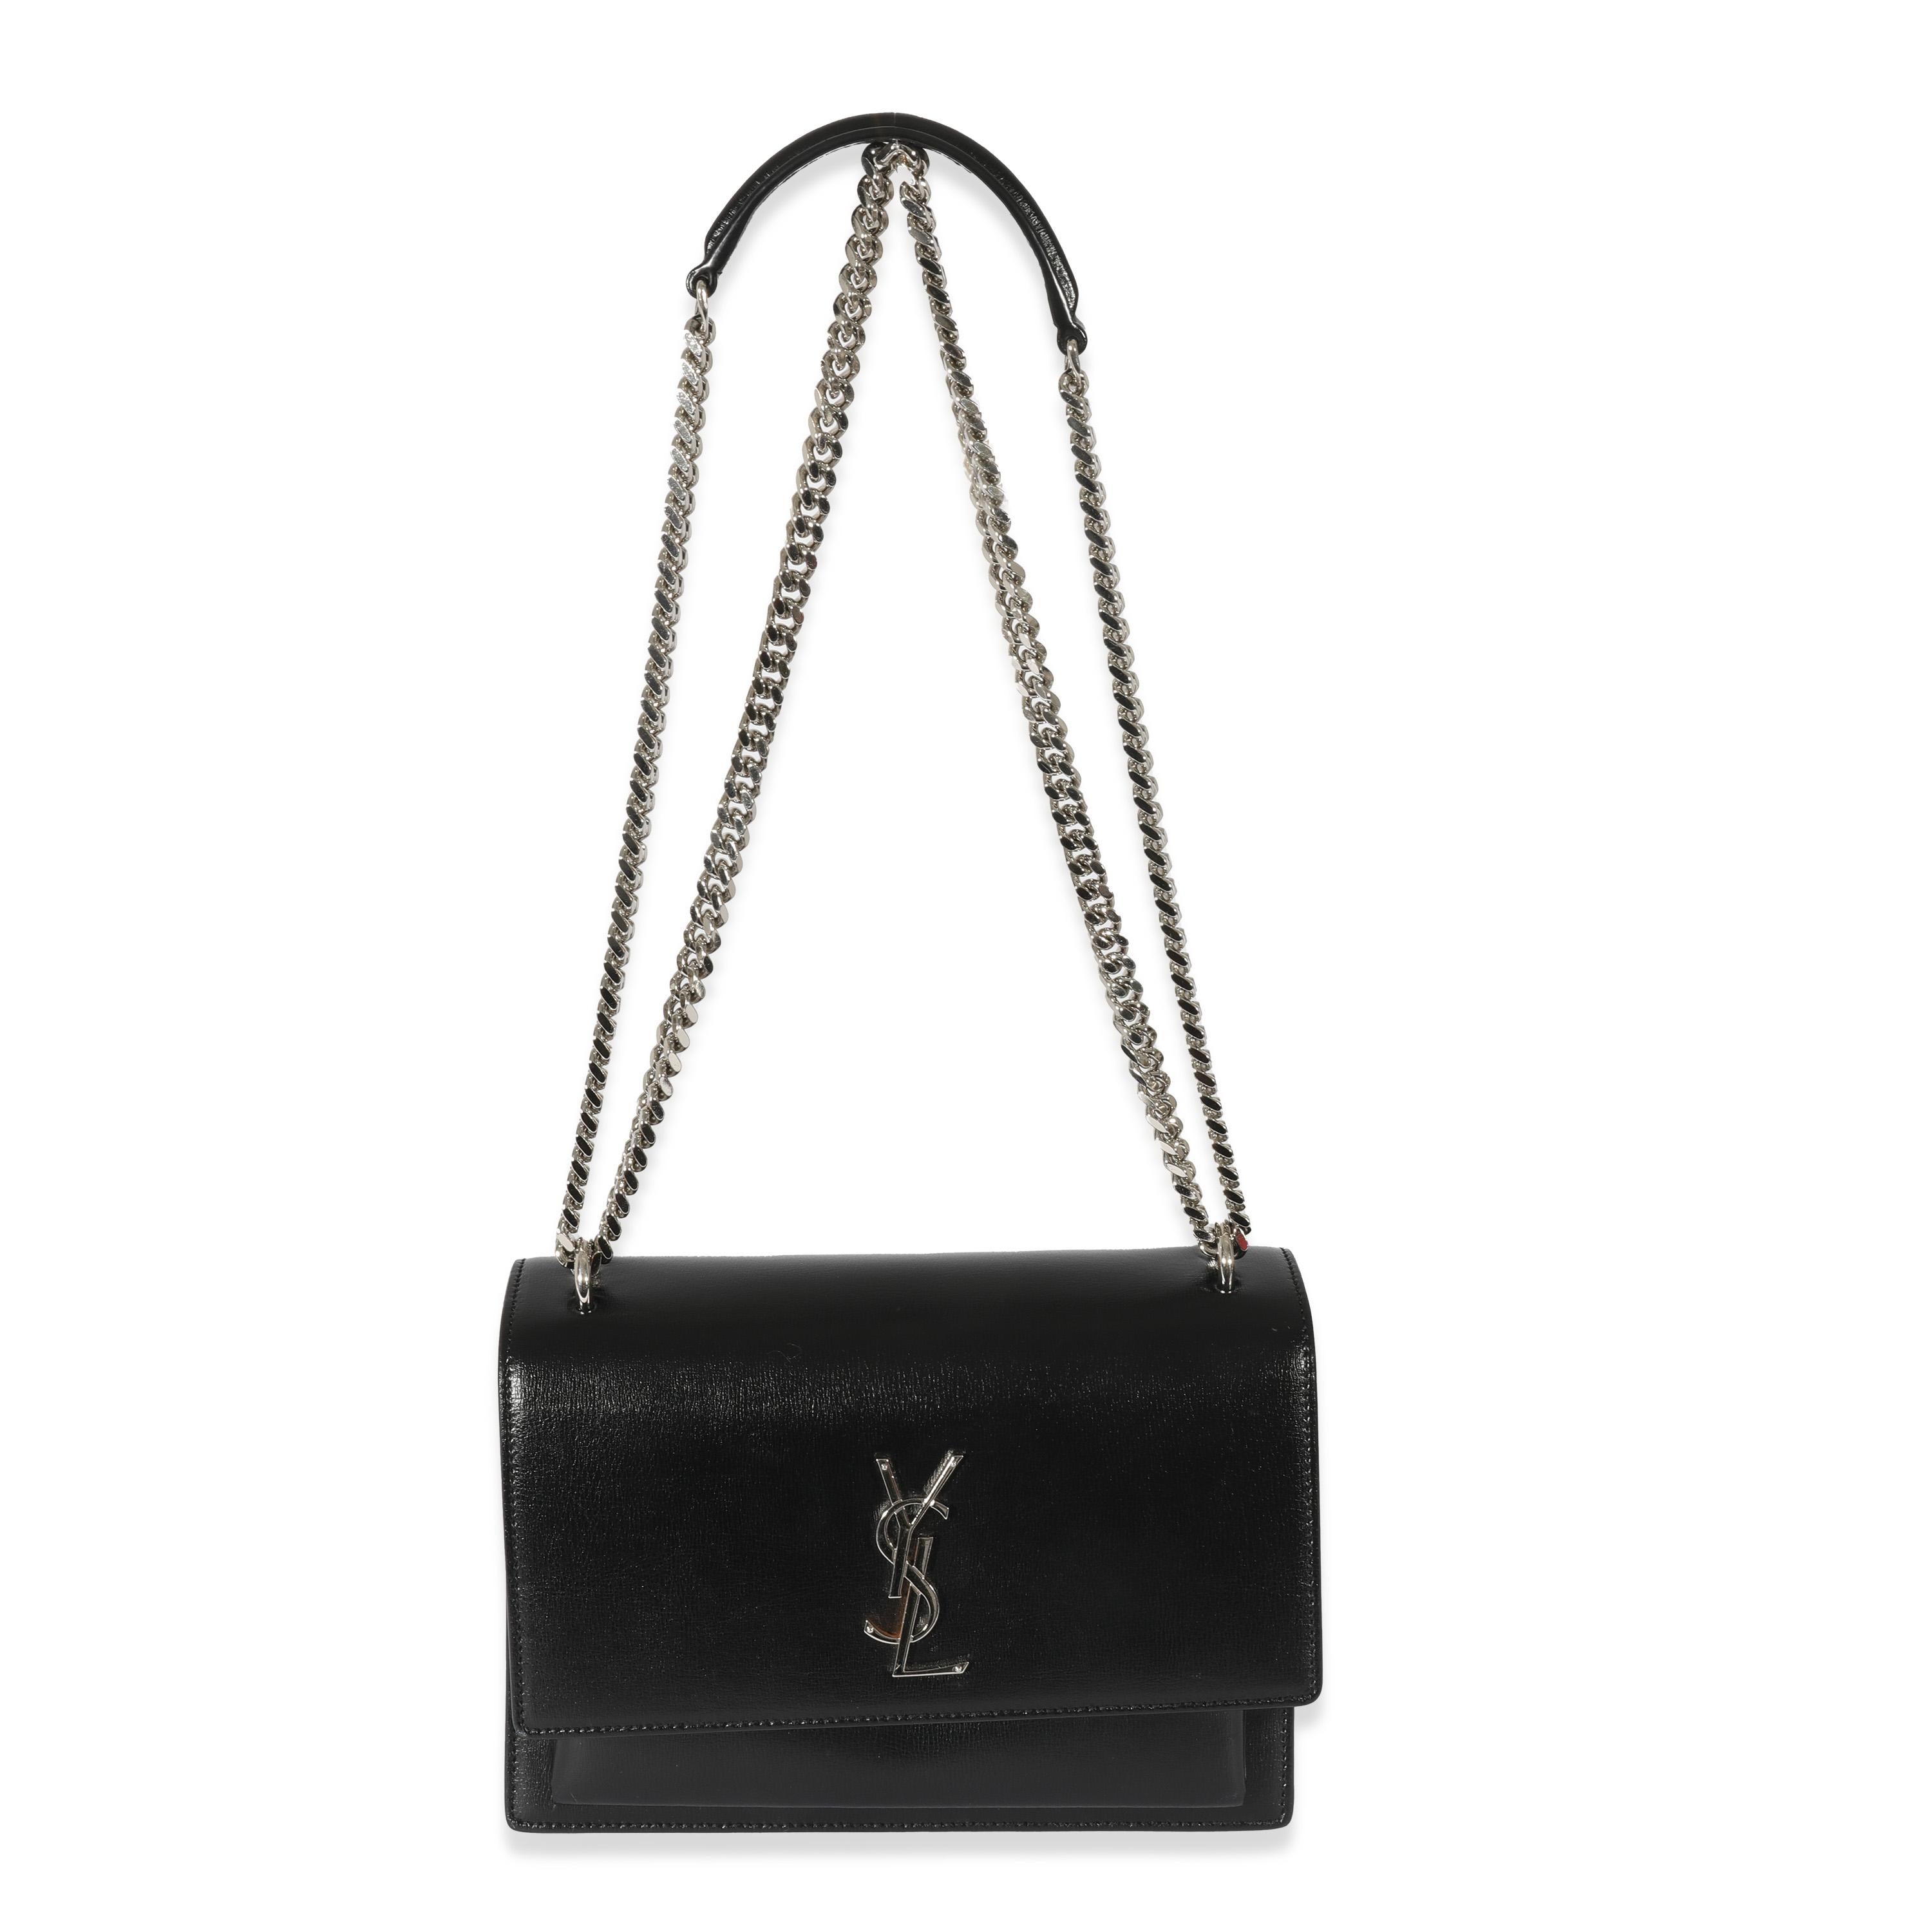 Listing Title: Saint Laurent Black Smooth Leather Medium Sunset Bag
 SKU: 128288
 MSRP: 2700.00
 Condition: Pre-owned 
 Handbag Condition: Very Good
 Condition Comments: Very Good Condition. Exterior light scuffing at corners. Scratching at